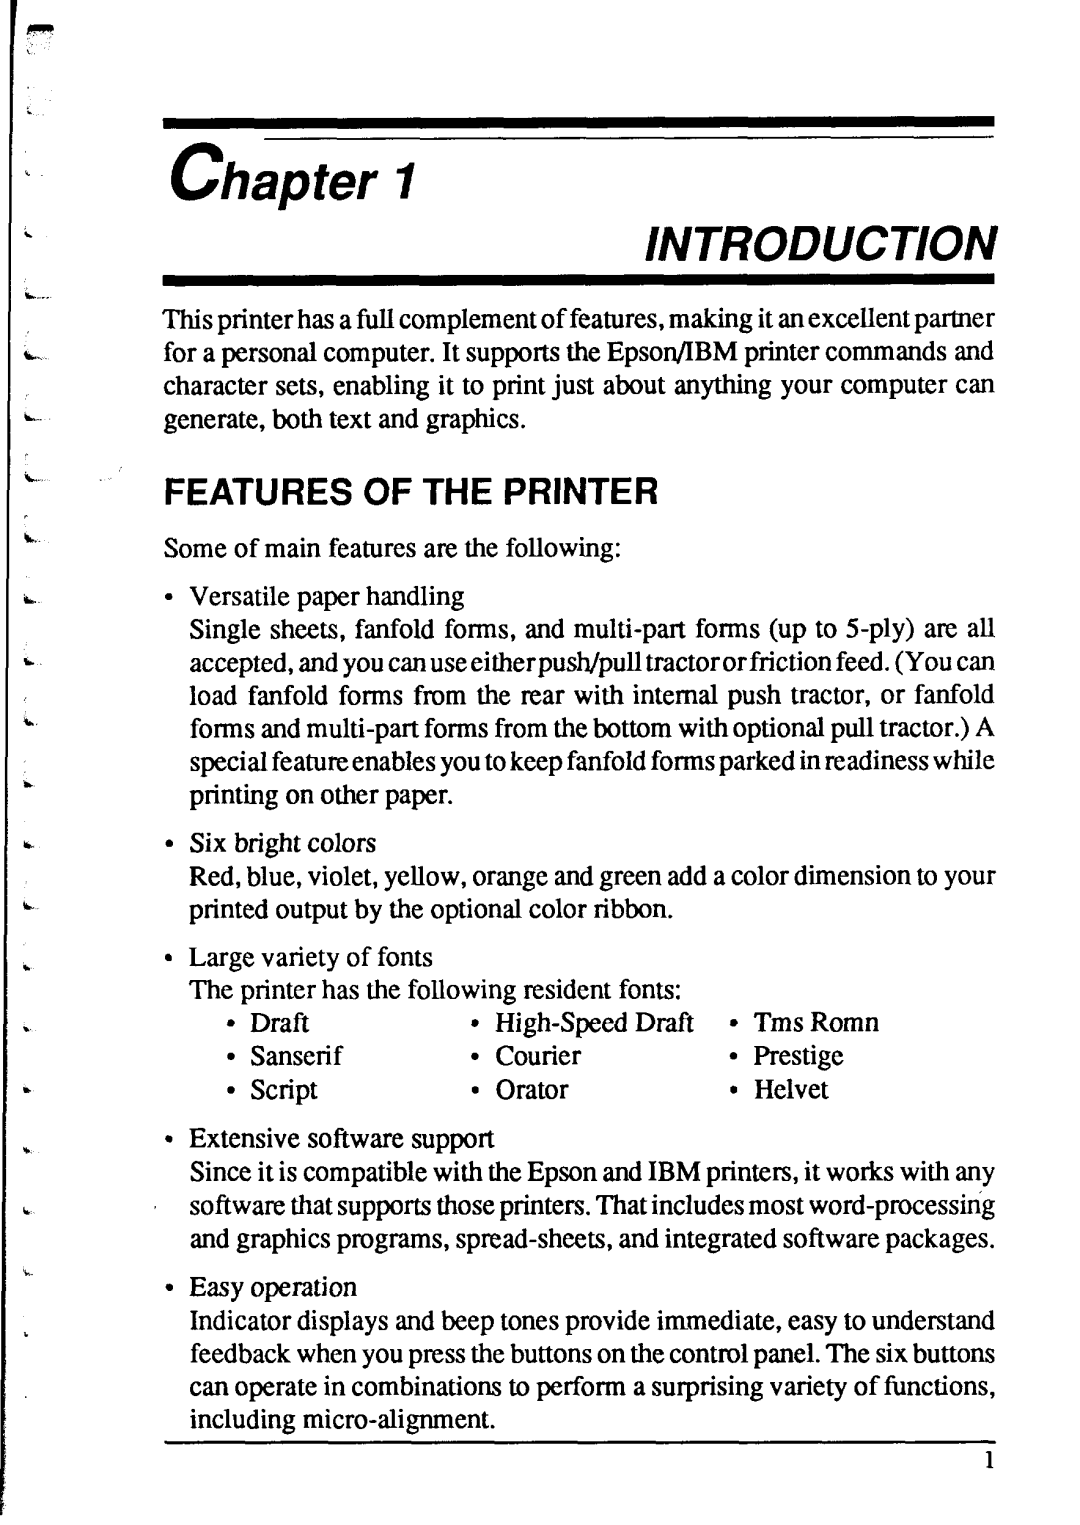 Star Micronics XR-1520, XR-1020 manual Chapter, Introduction, Features Of The Printer 